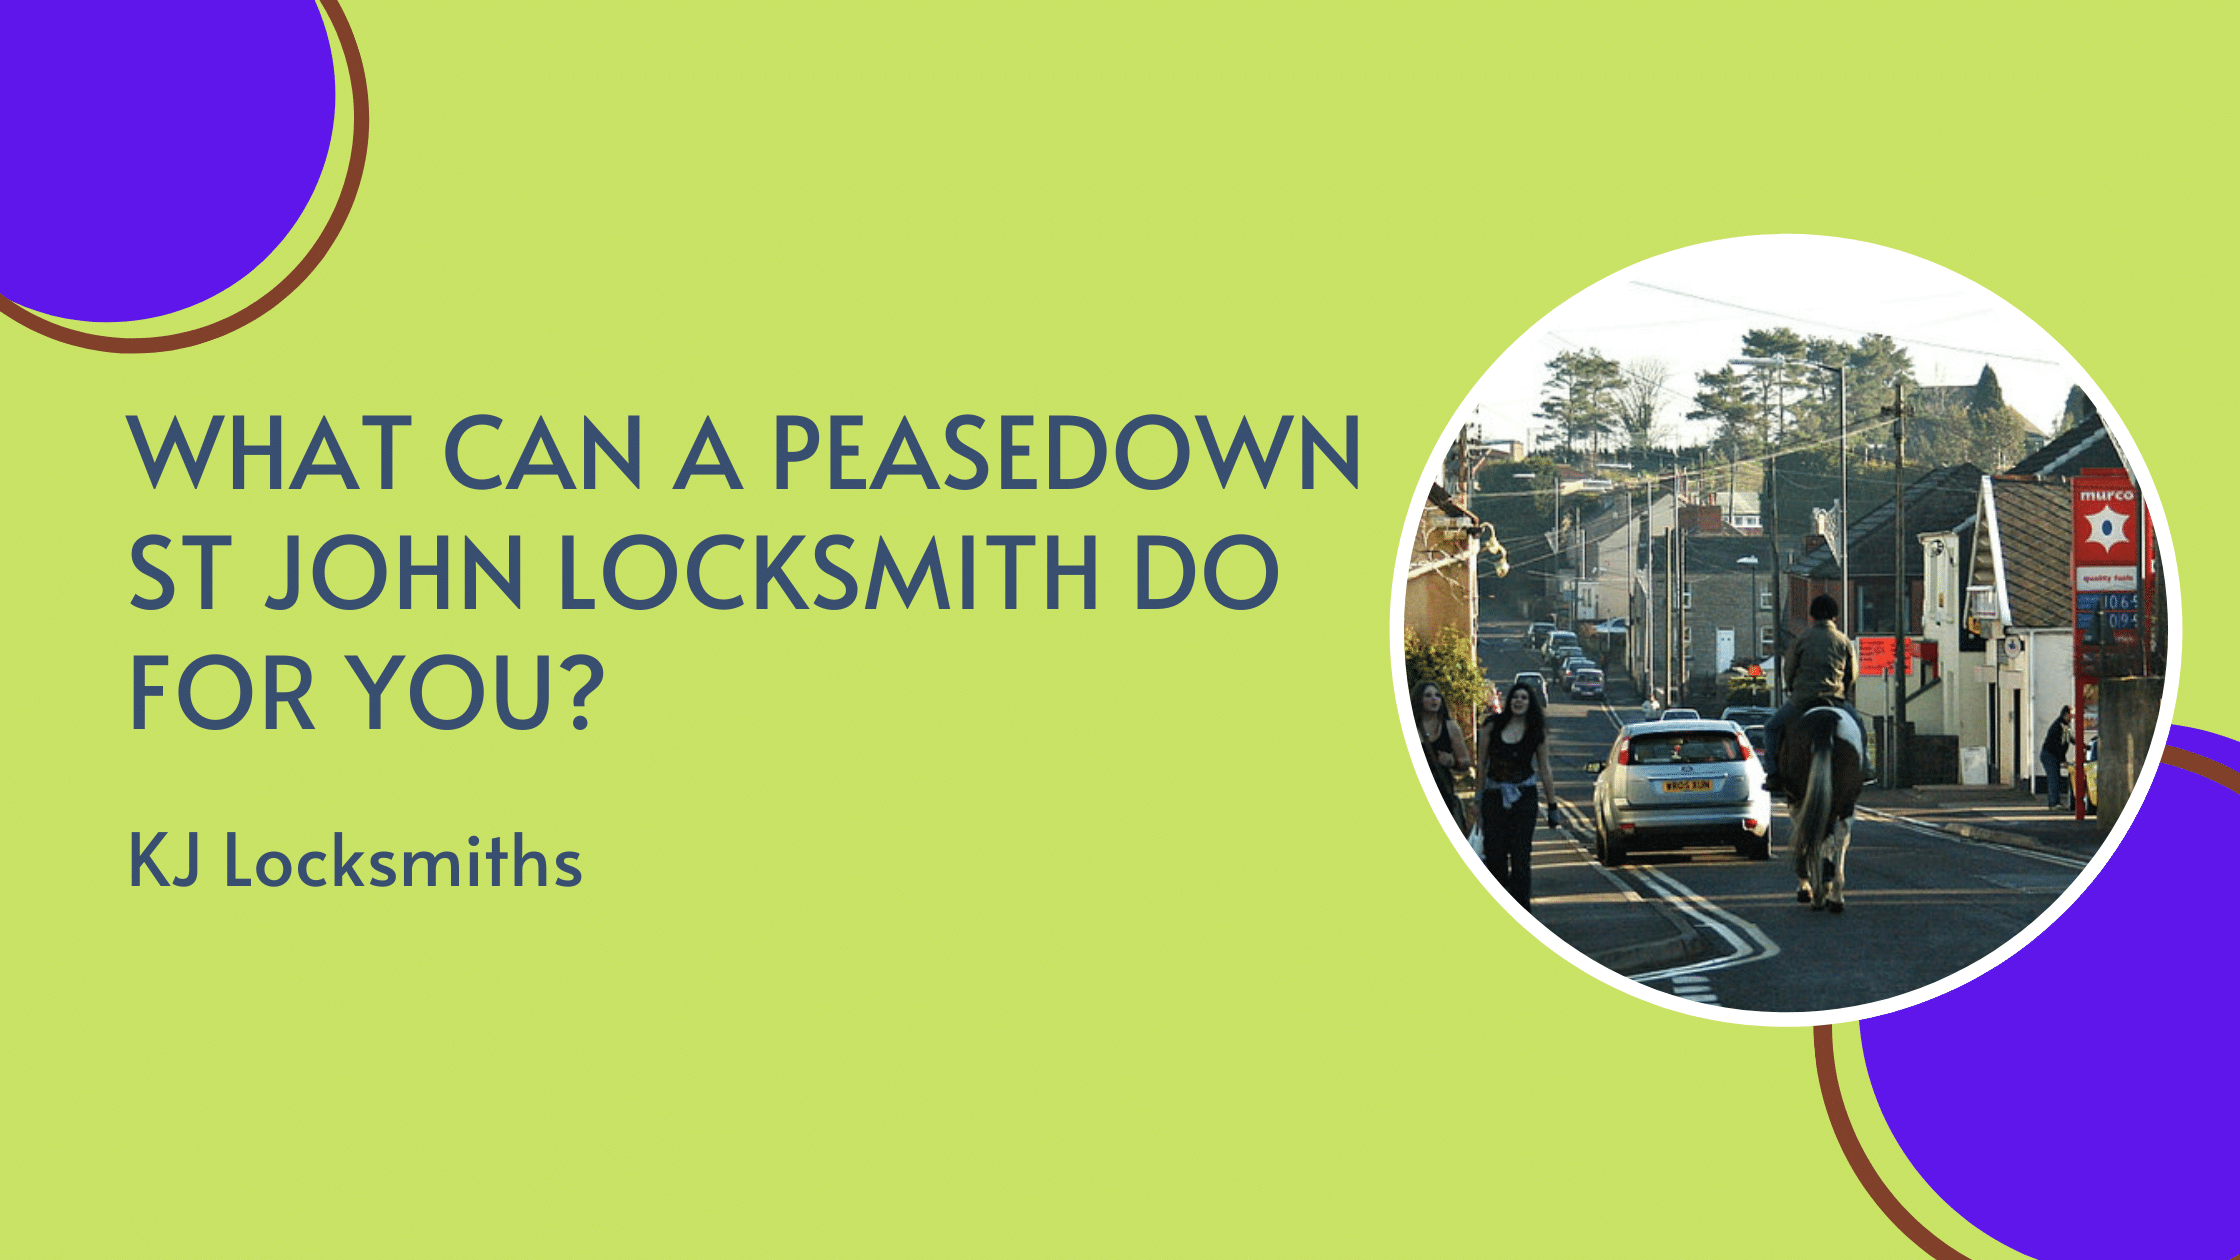 What Can A Peasedown St John Locksmith Do For You?